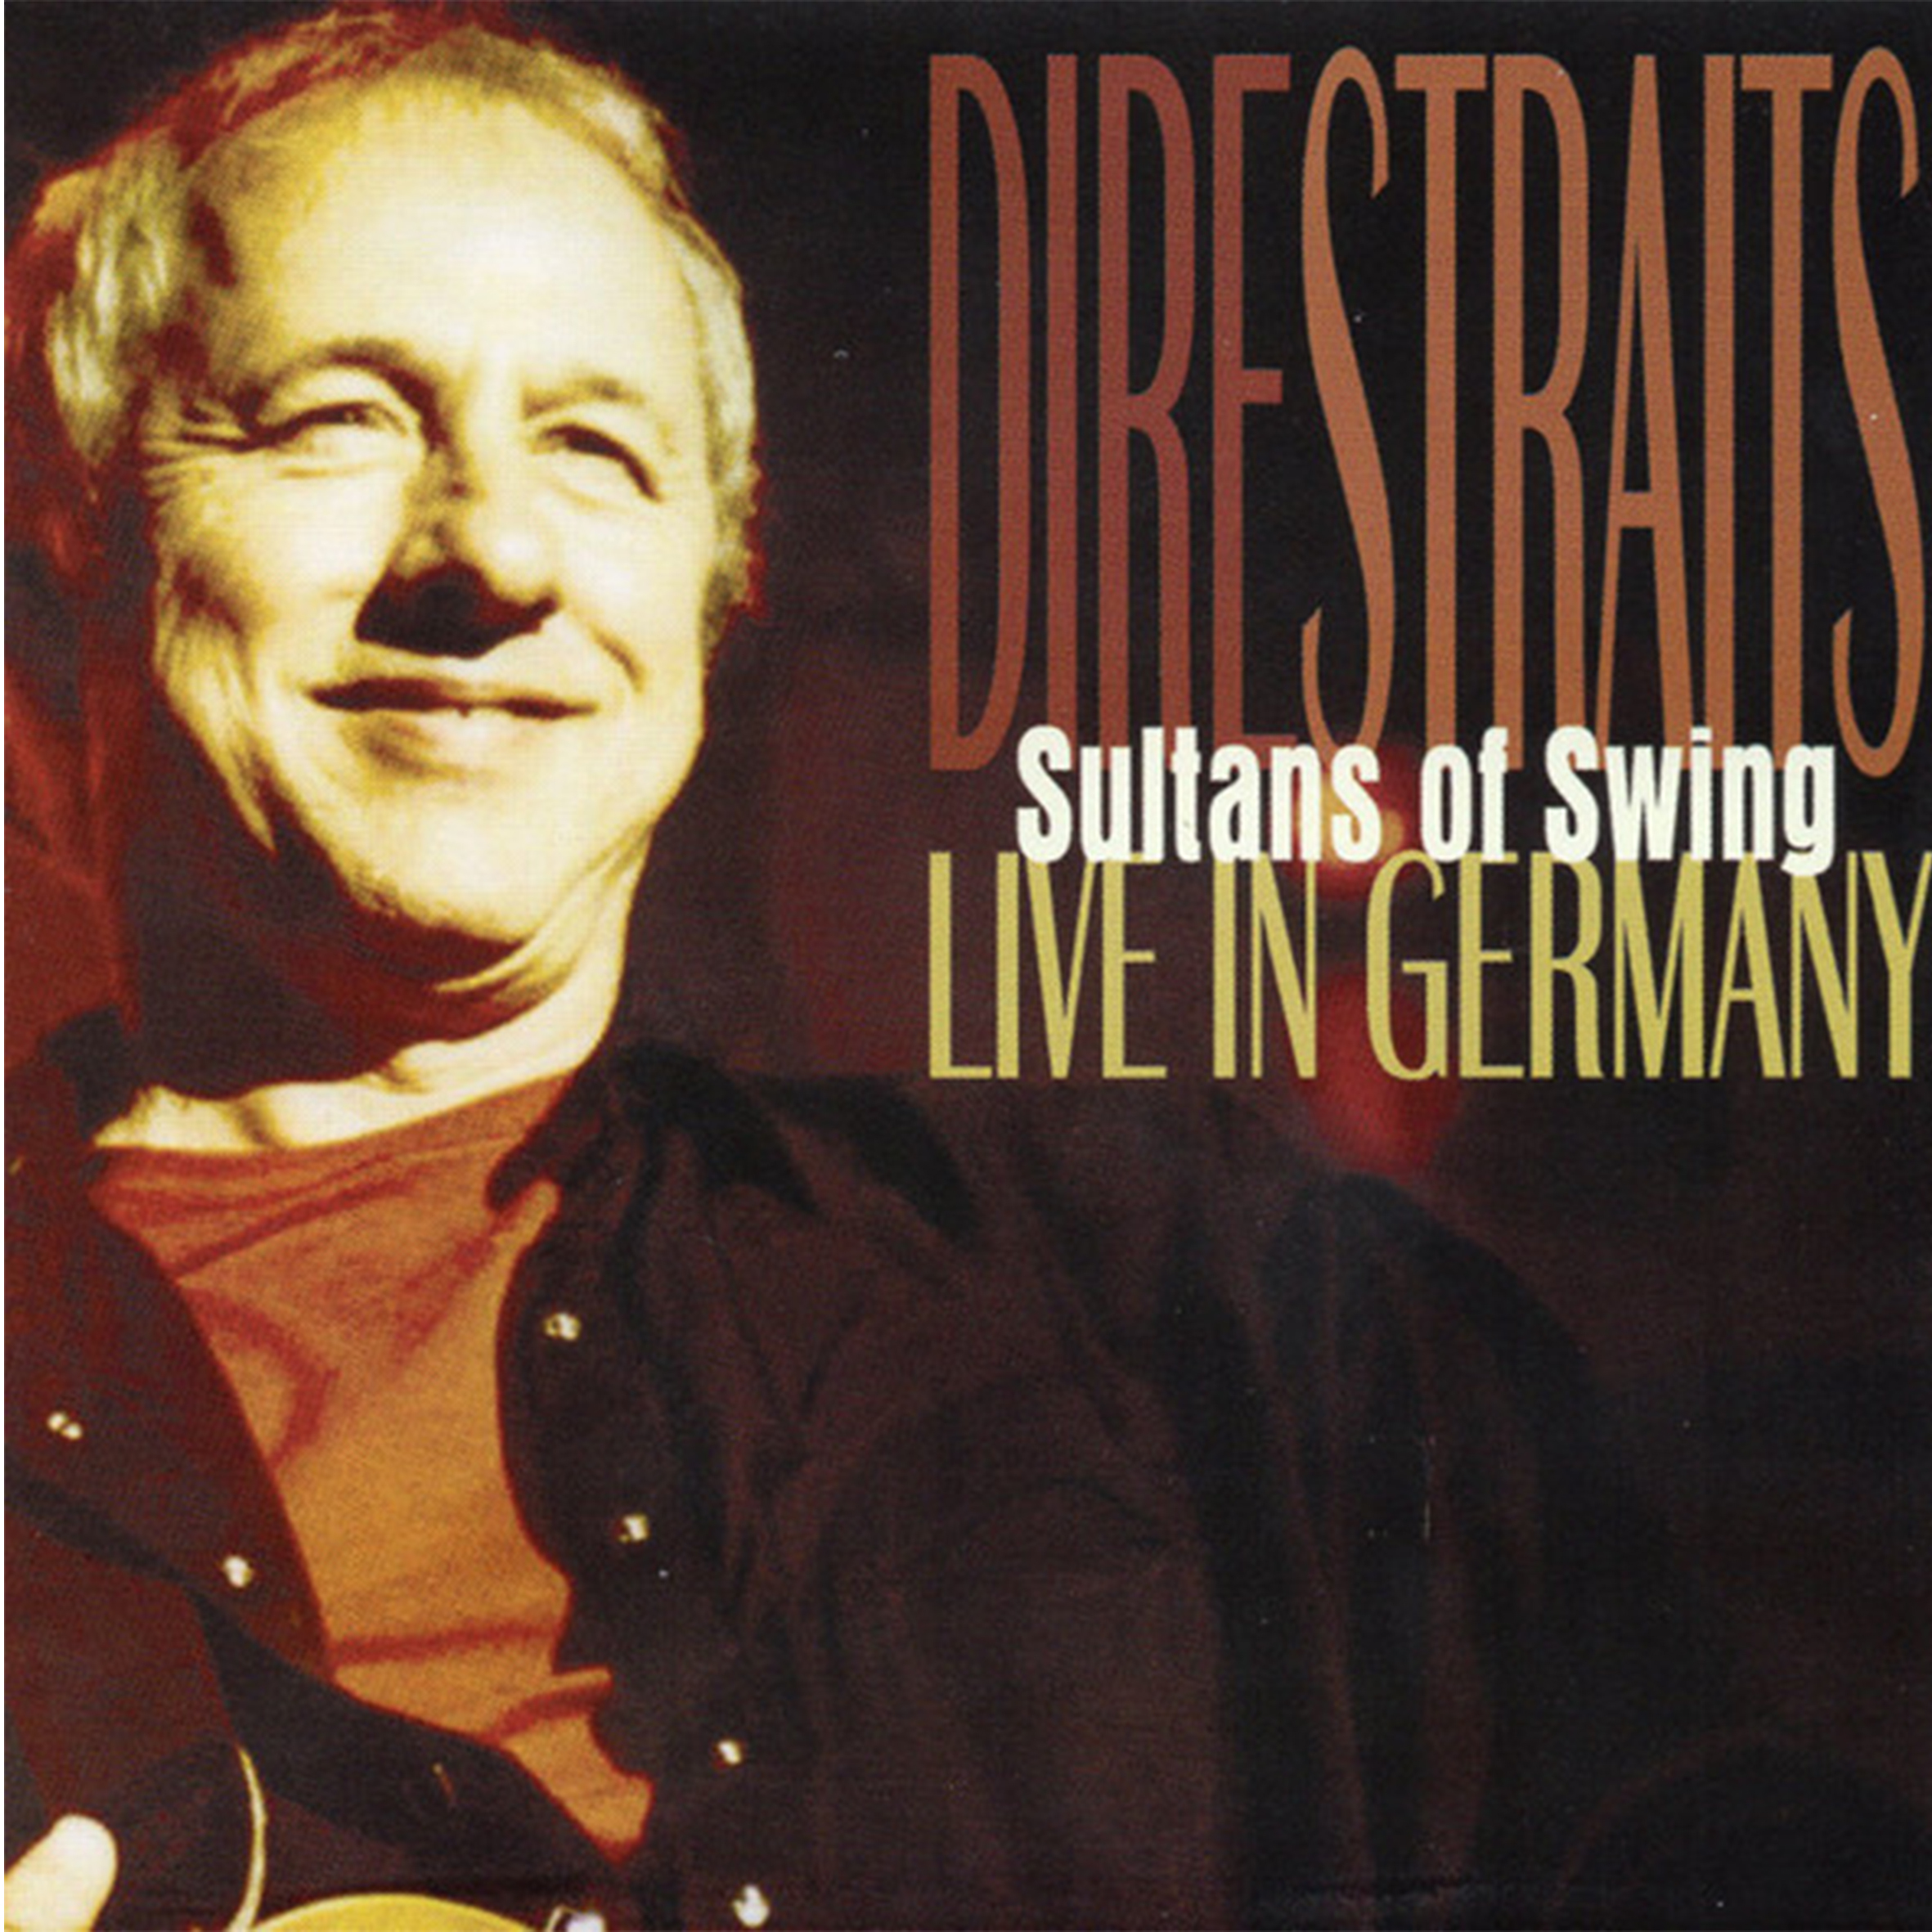 CD - Dire Straits - Sultans Of Swing Live In Germany